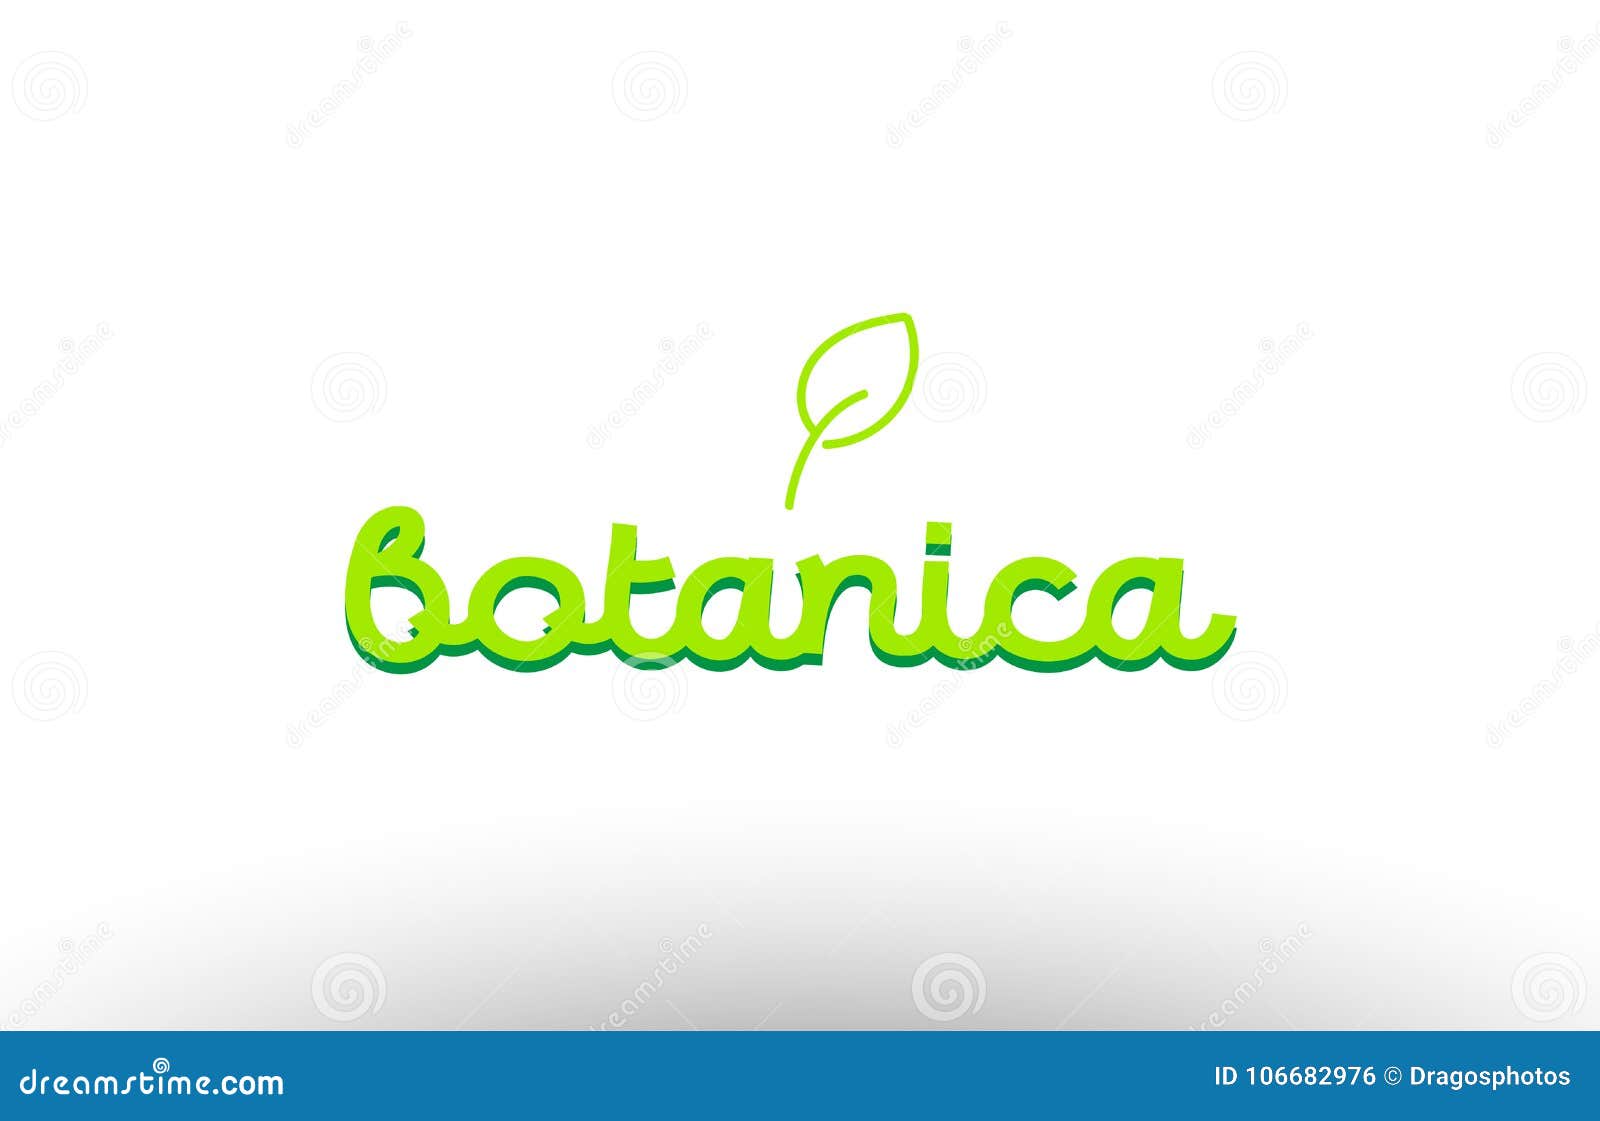 botanica word concept with green leaf logo icon company 